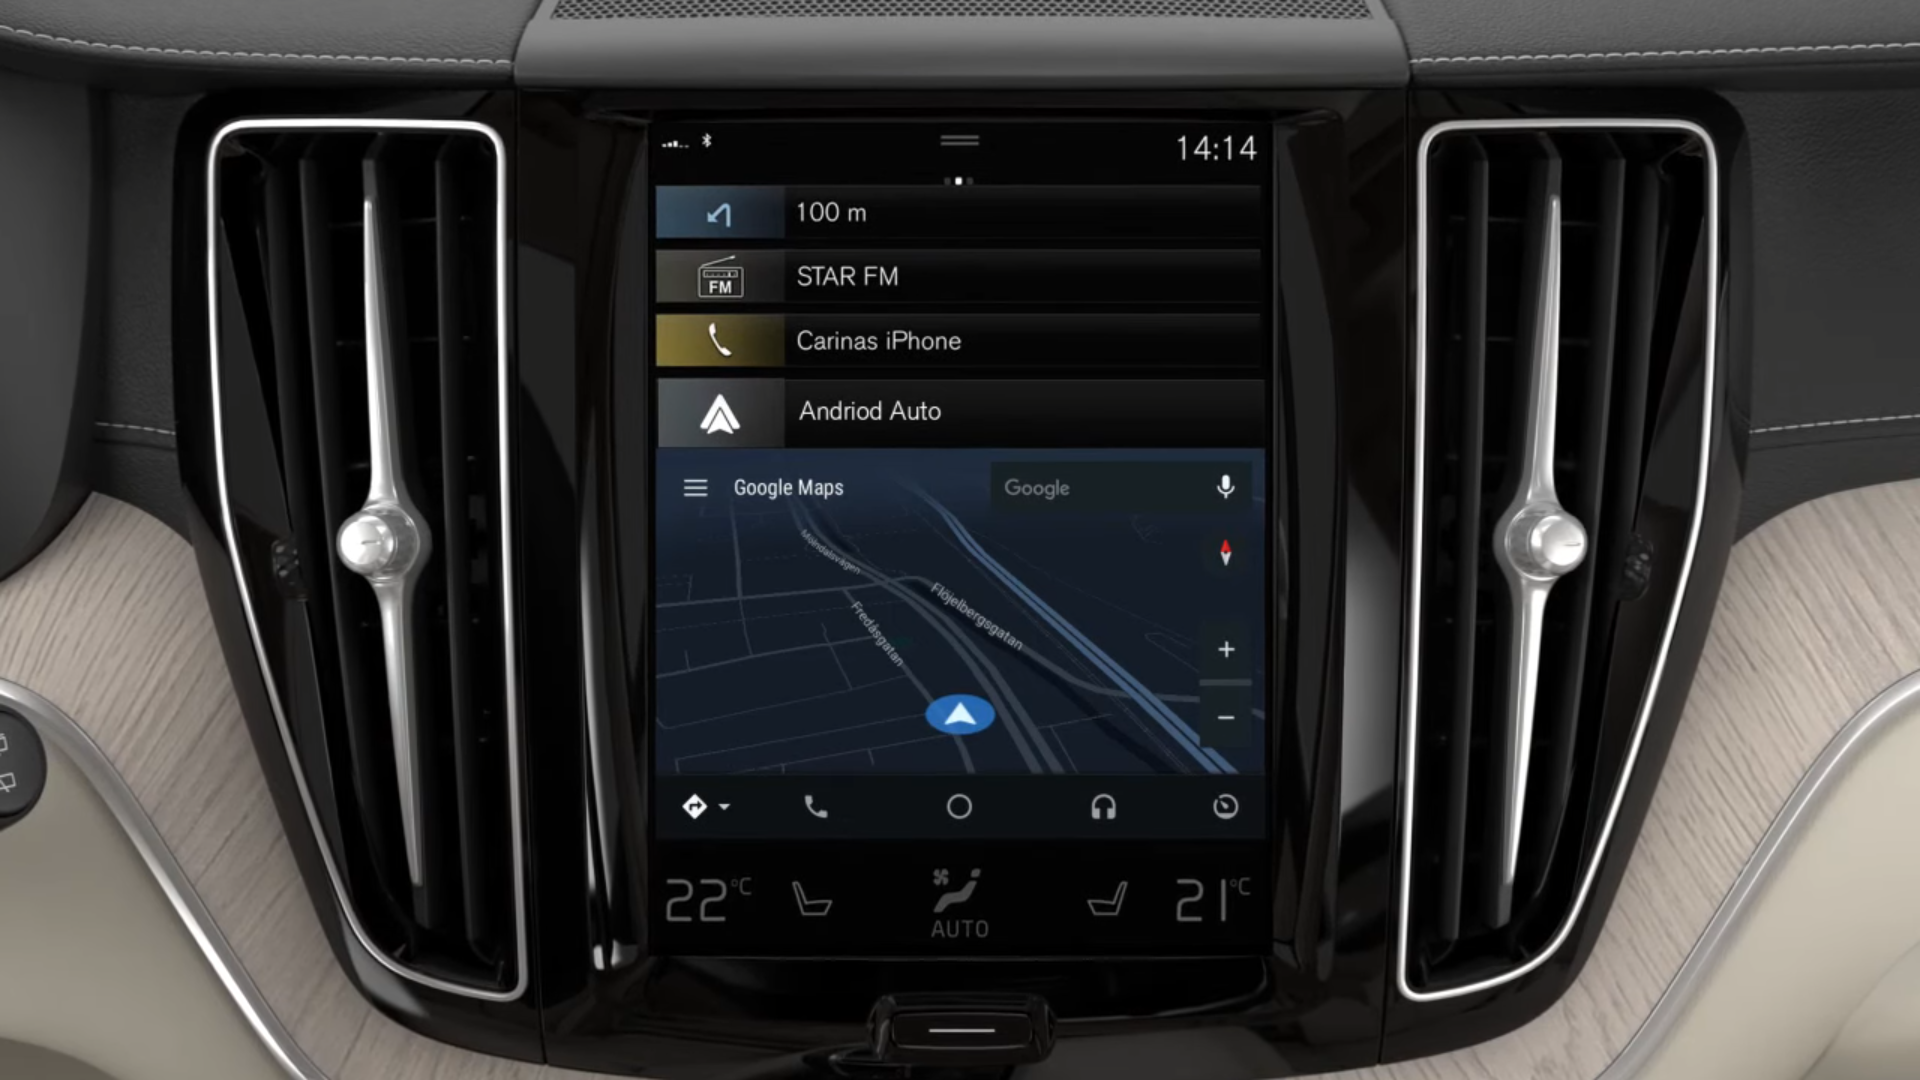 Android Auto updated! New look and better split-screen